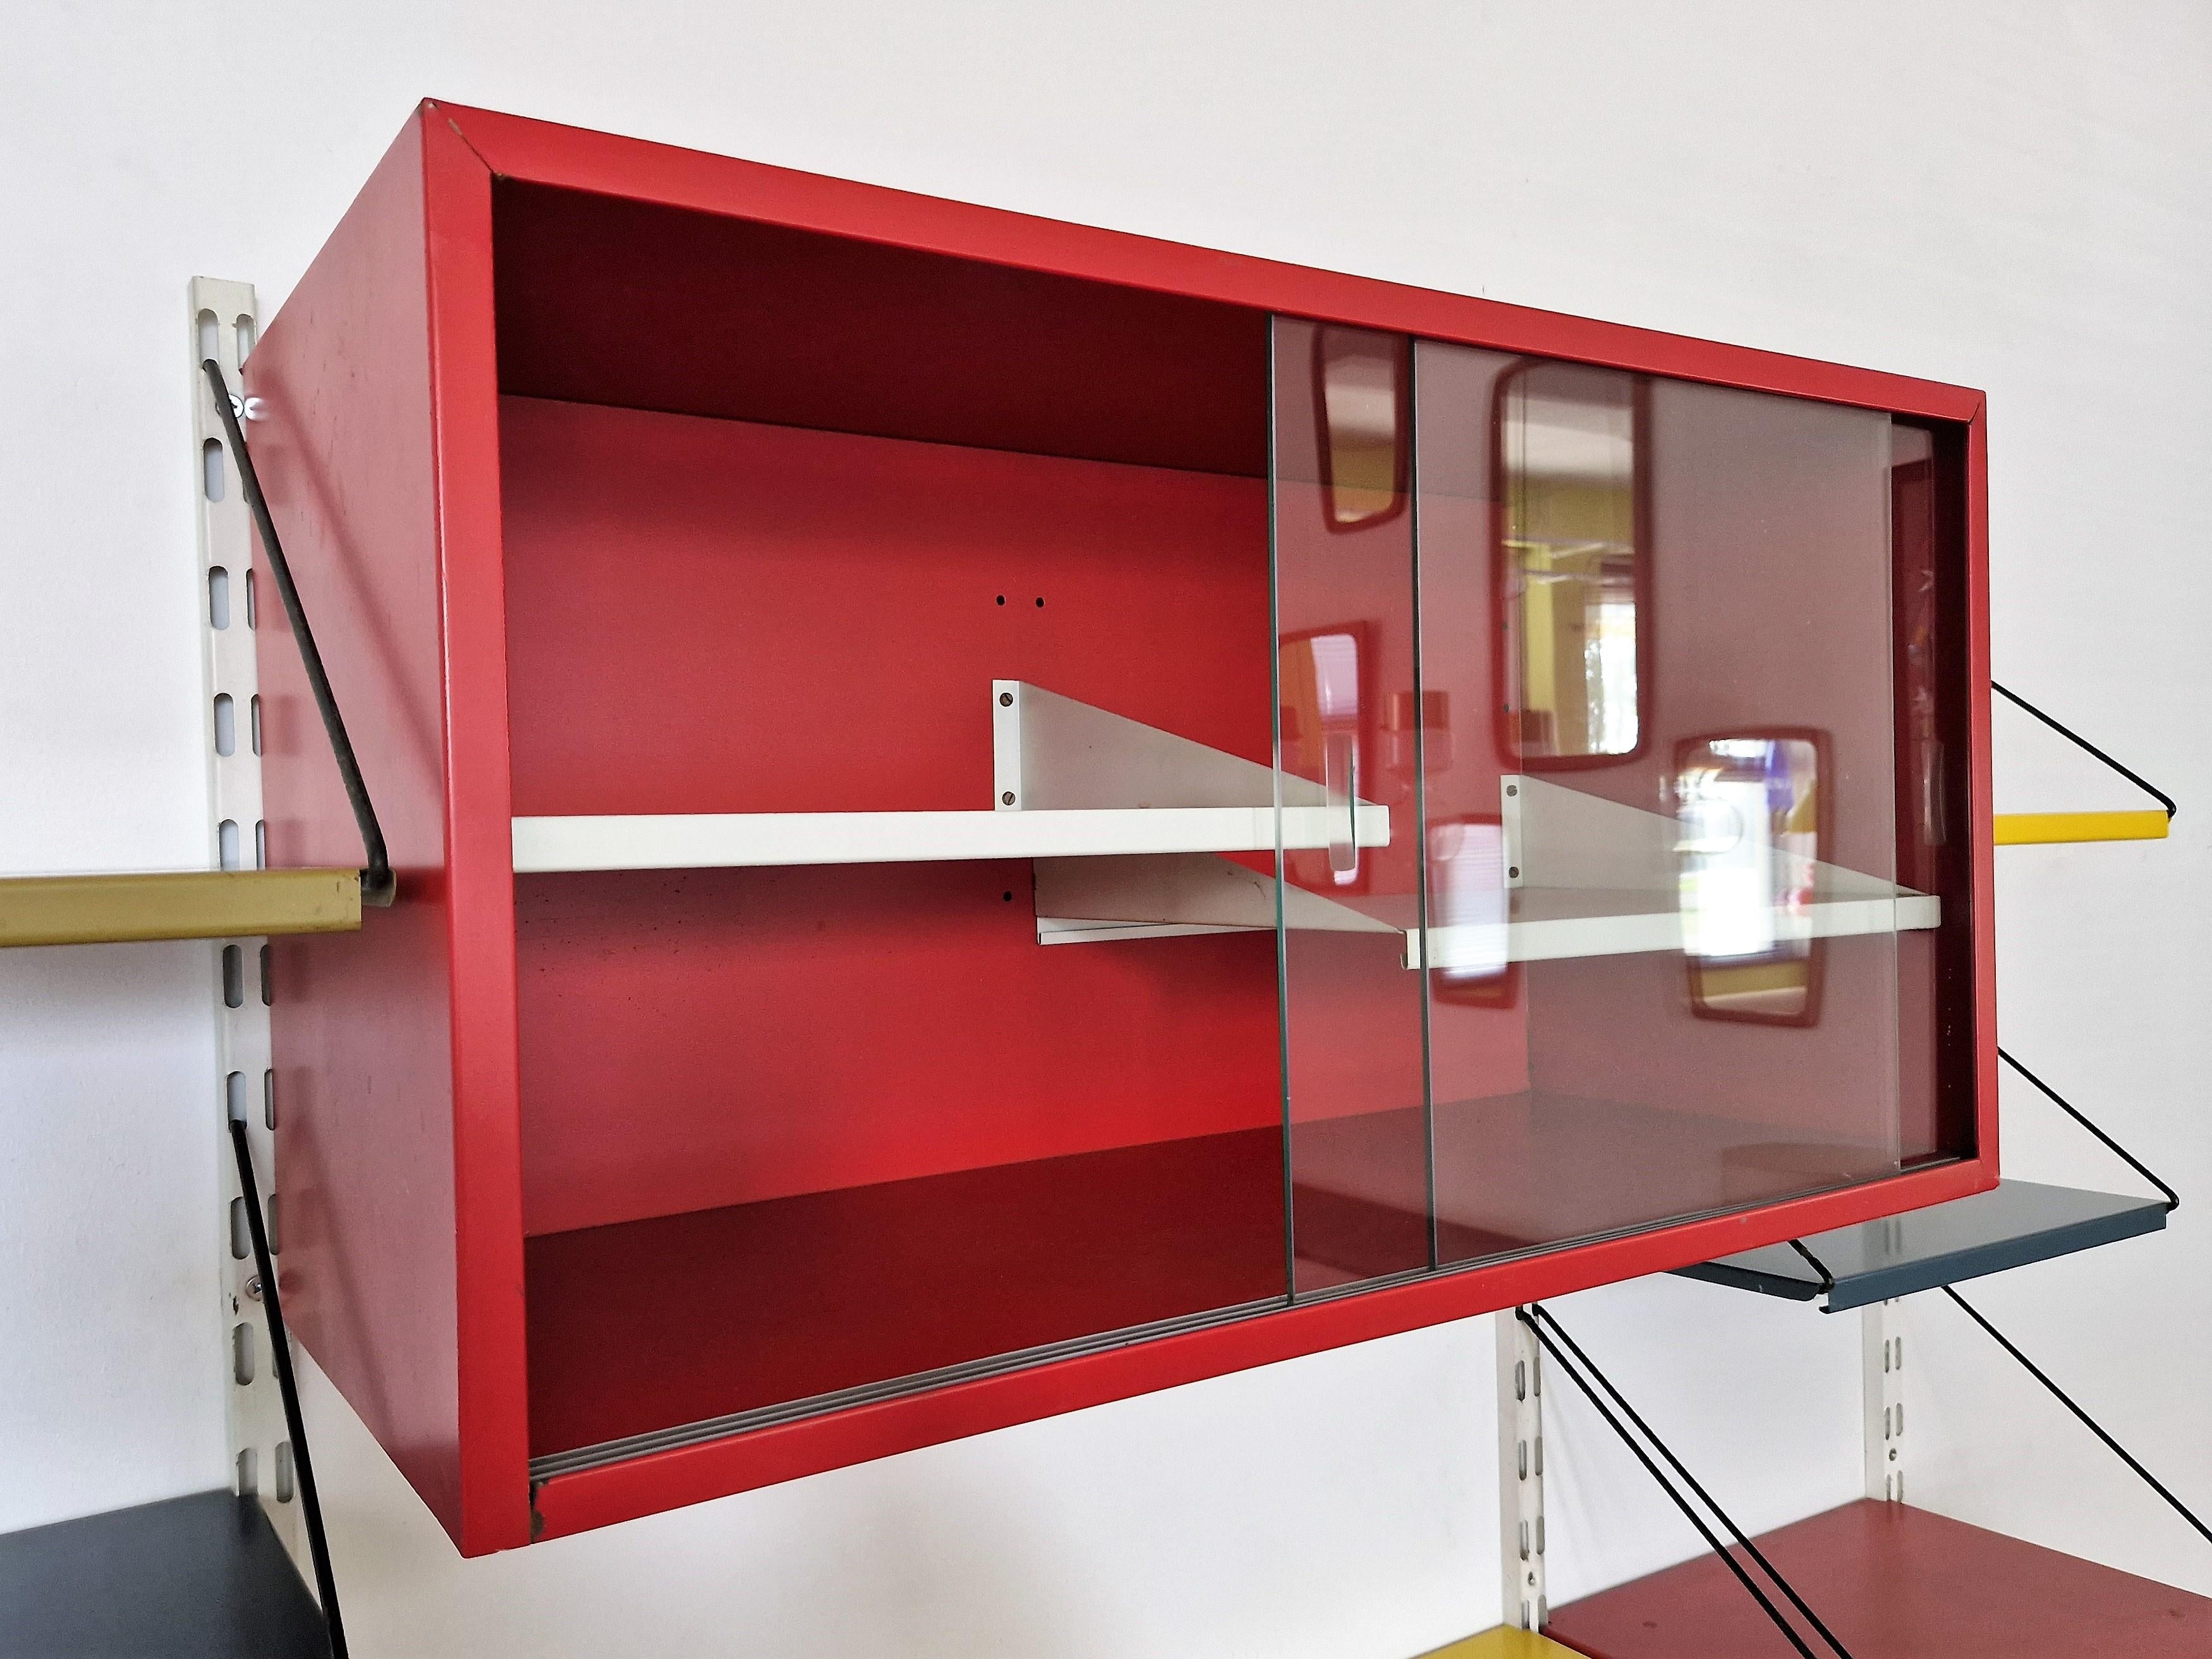 Mid-20th Century Metal Wall Unit in Red, Yellow and Blue by Tjerk Rijenga for Pilastro, 1950's For Sale